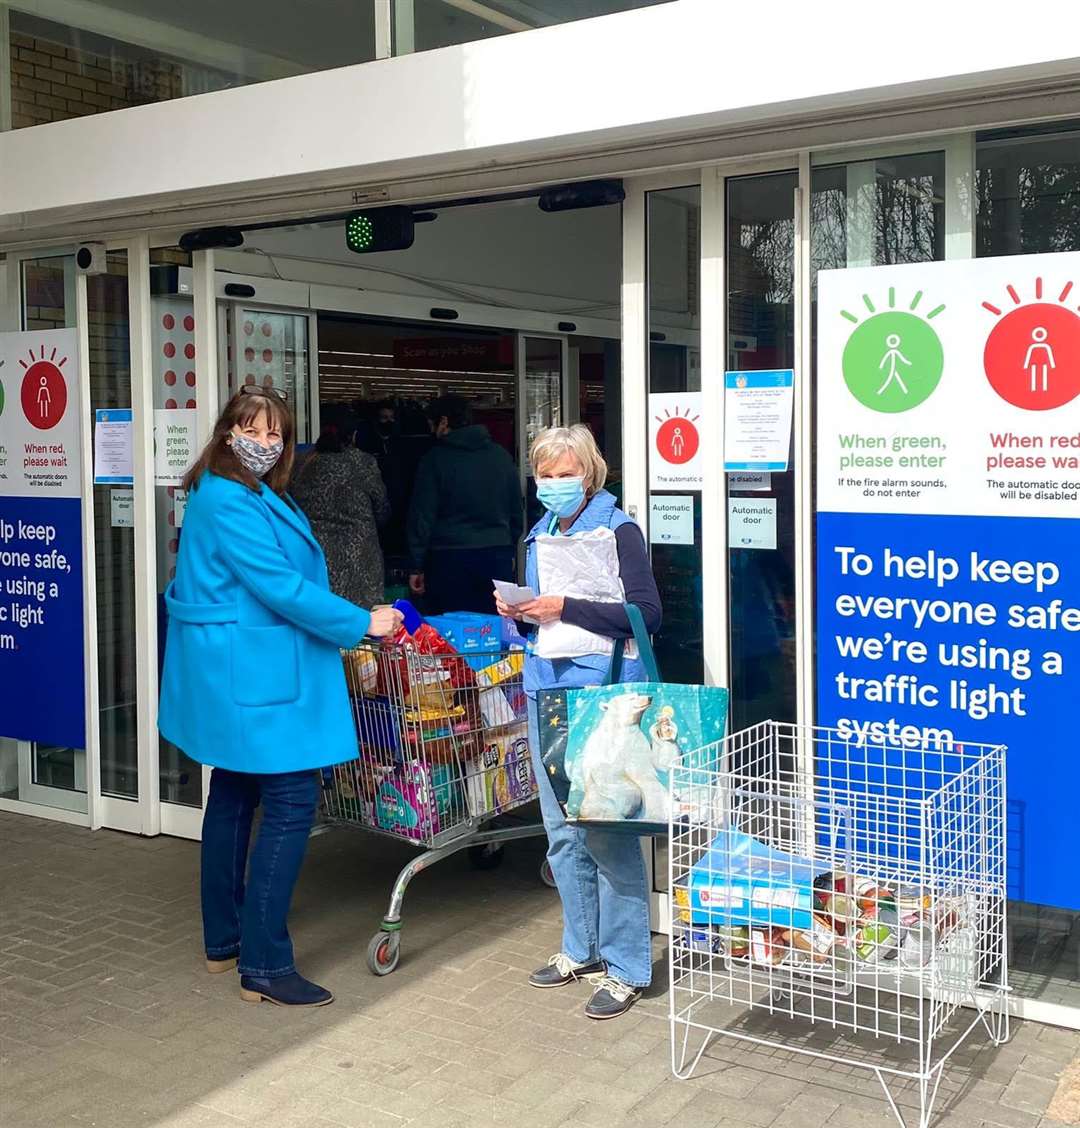 A shopper receives a donation wish list from a volunteer at Tesco